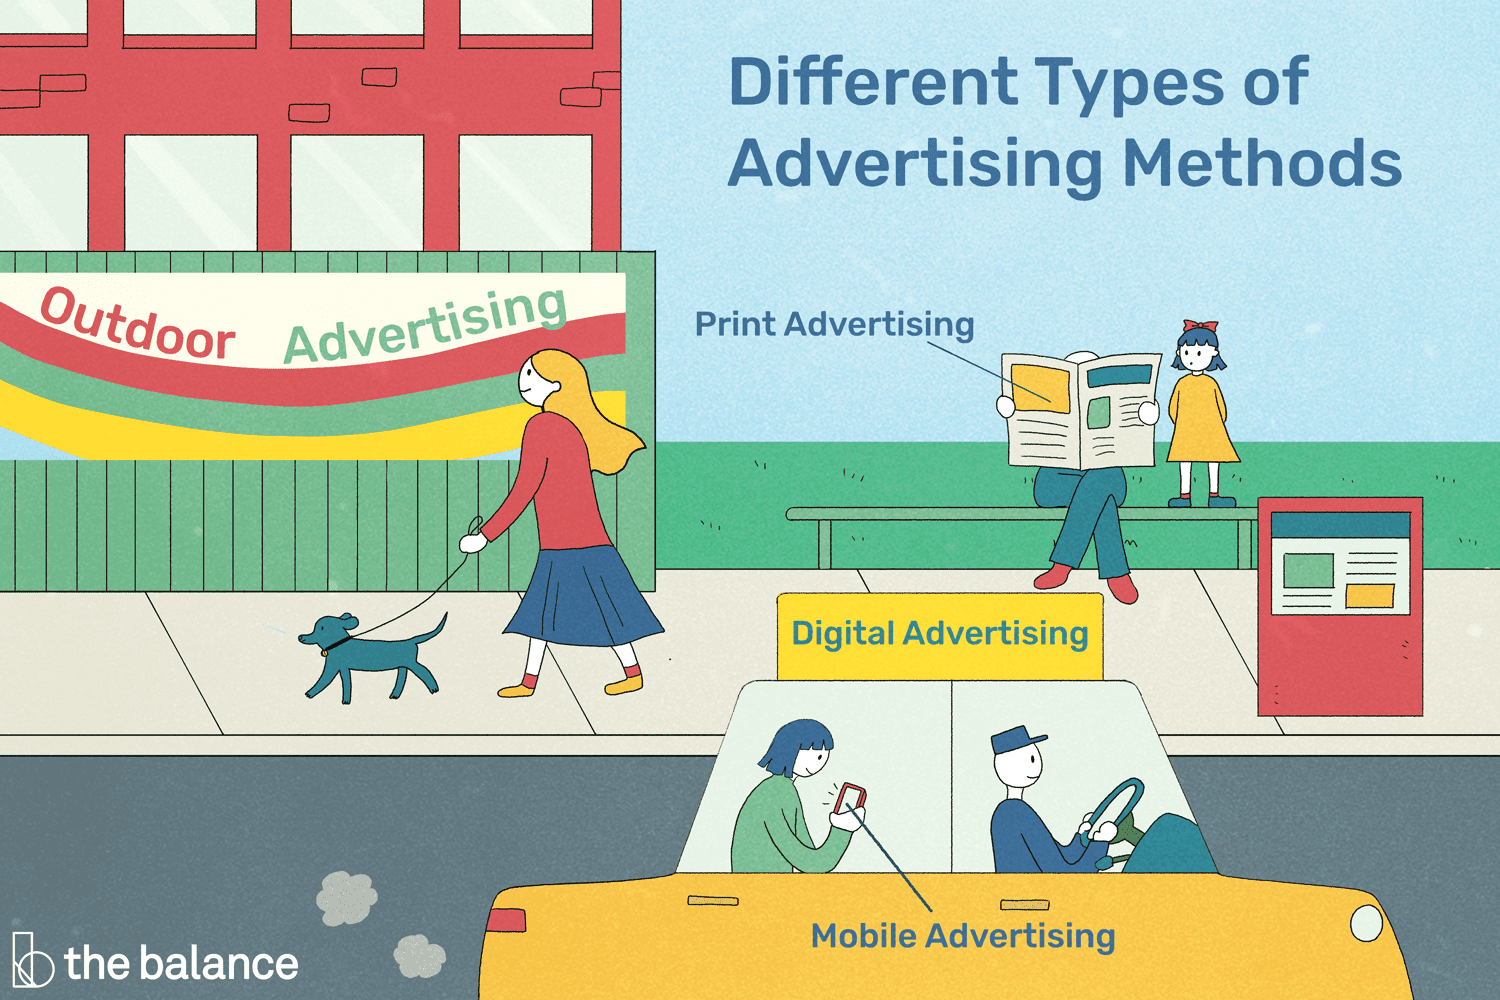 Advertising marketing is. Types of advertising. Advertising methods. Different Types of advertising. Types of advertisement.